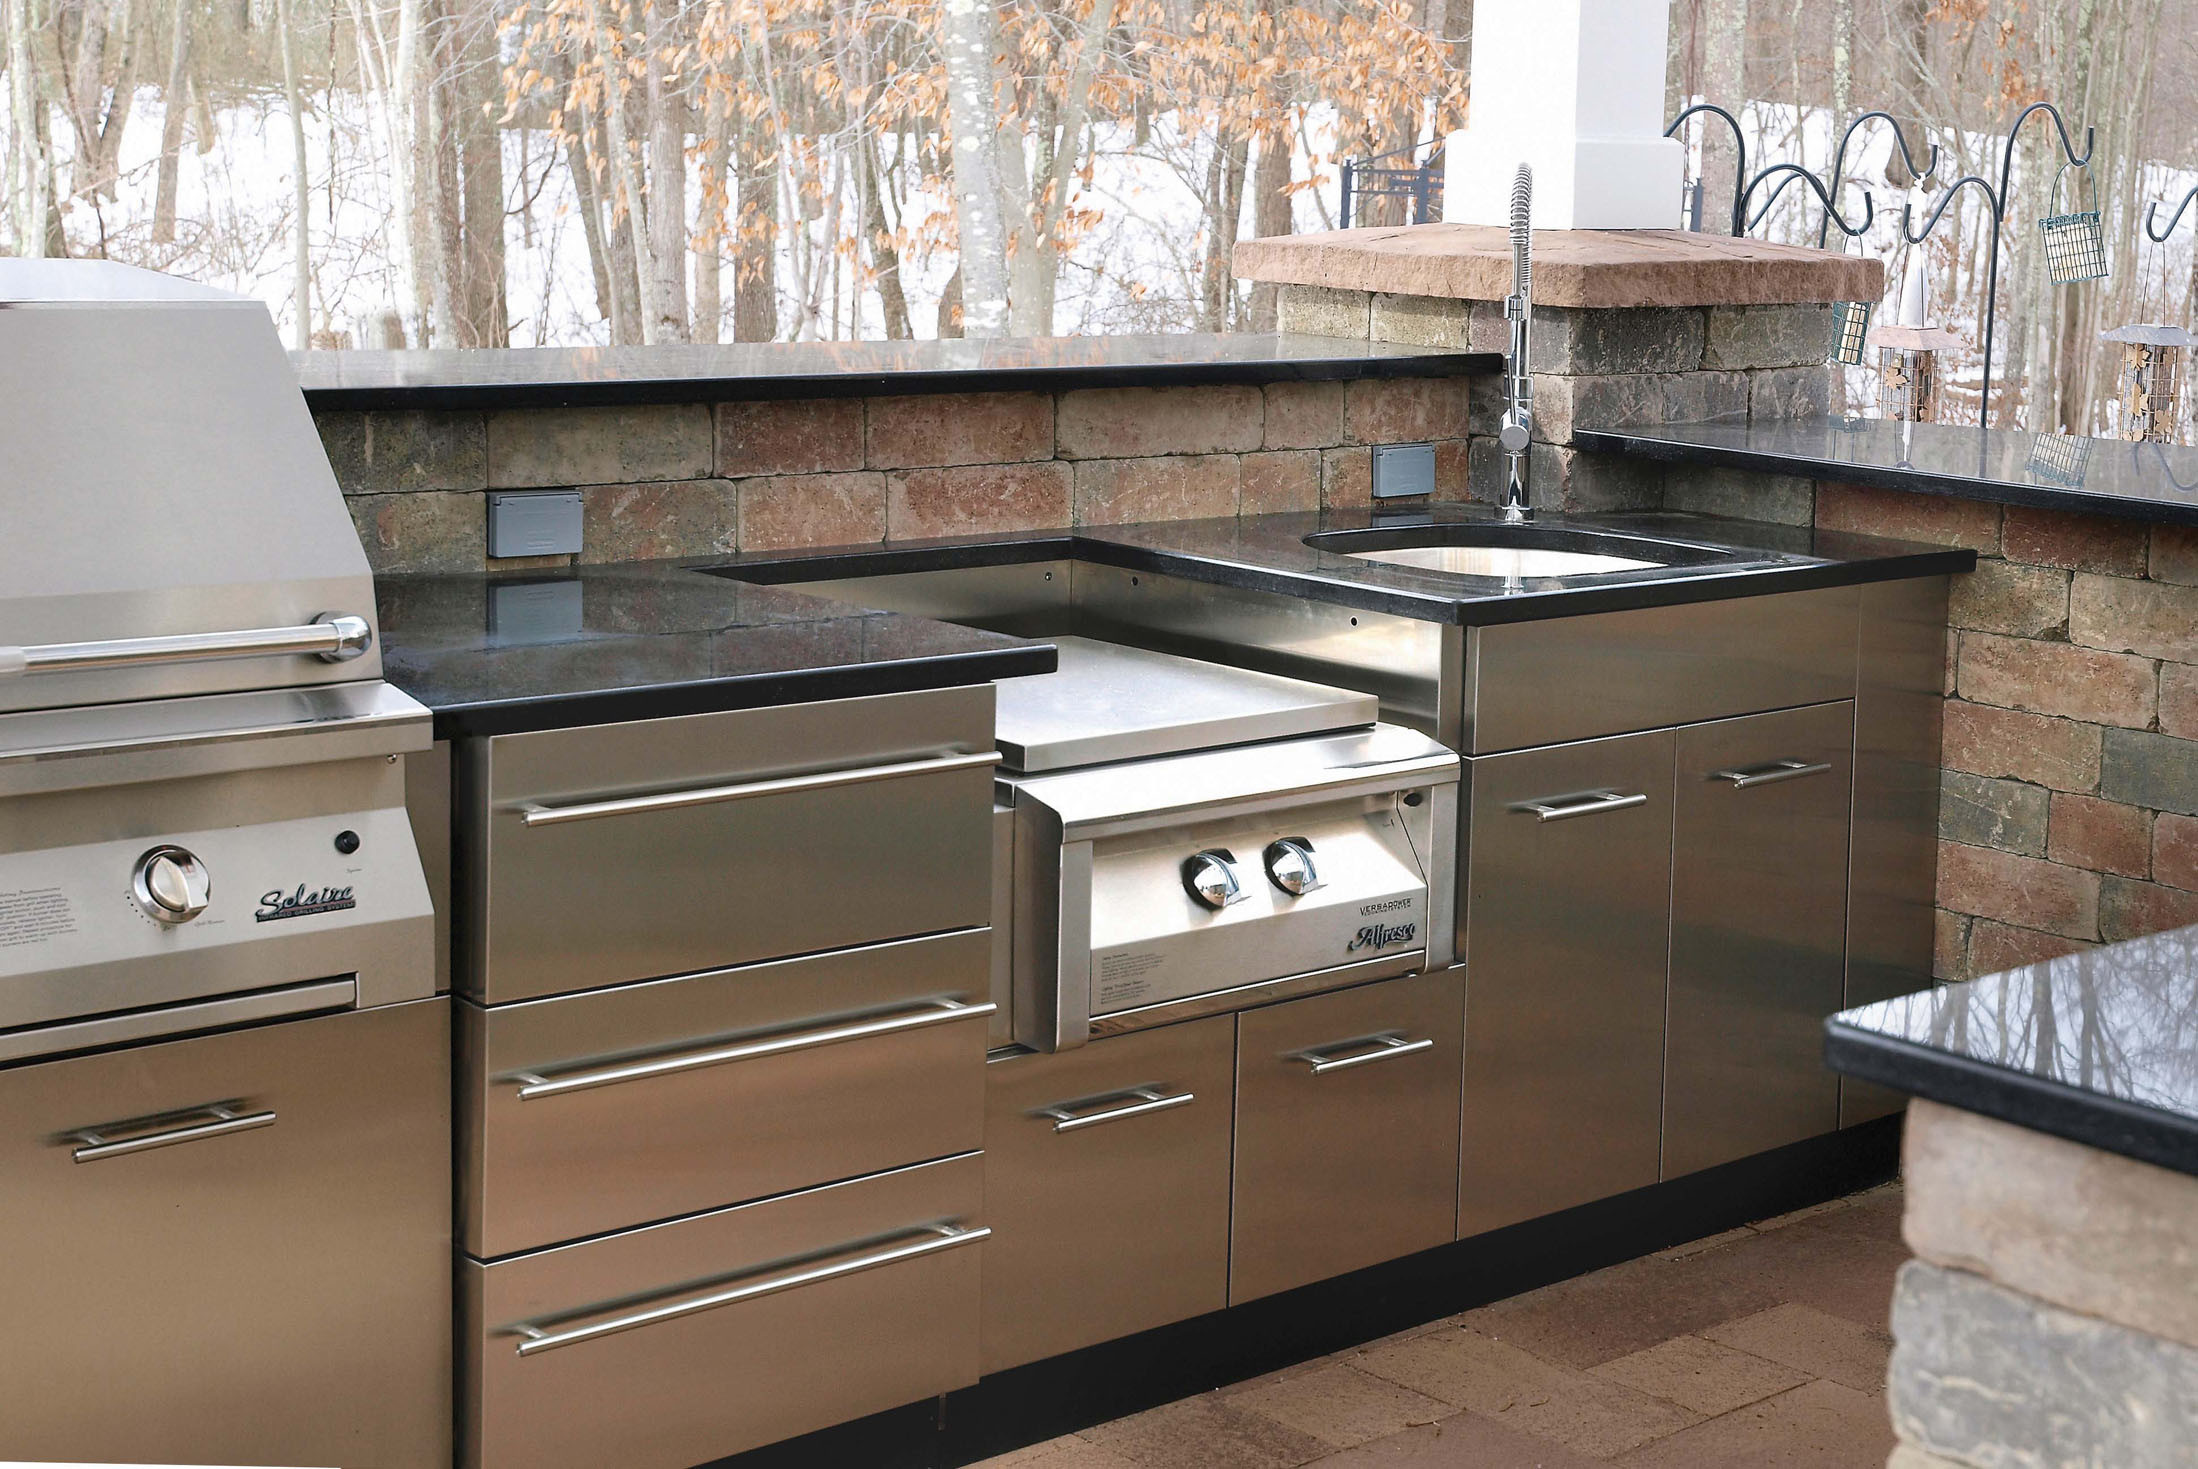 Stainless Steel Outdoor Kitchen Cabinets New Outdoor Stainless Kitchen In Winter In Ct Of Stainless Steel Outdoor Kitchen Cabinets 